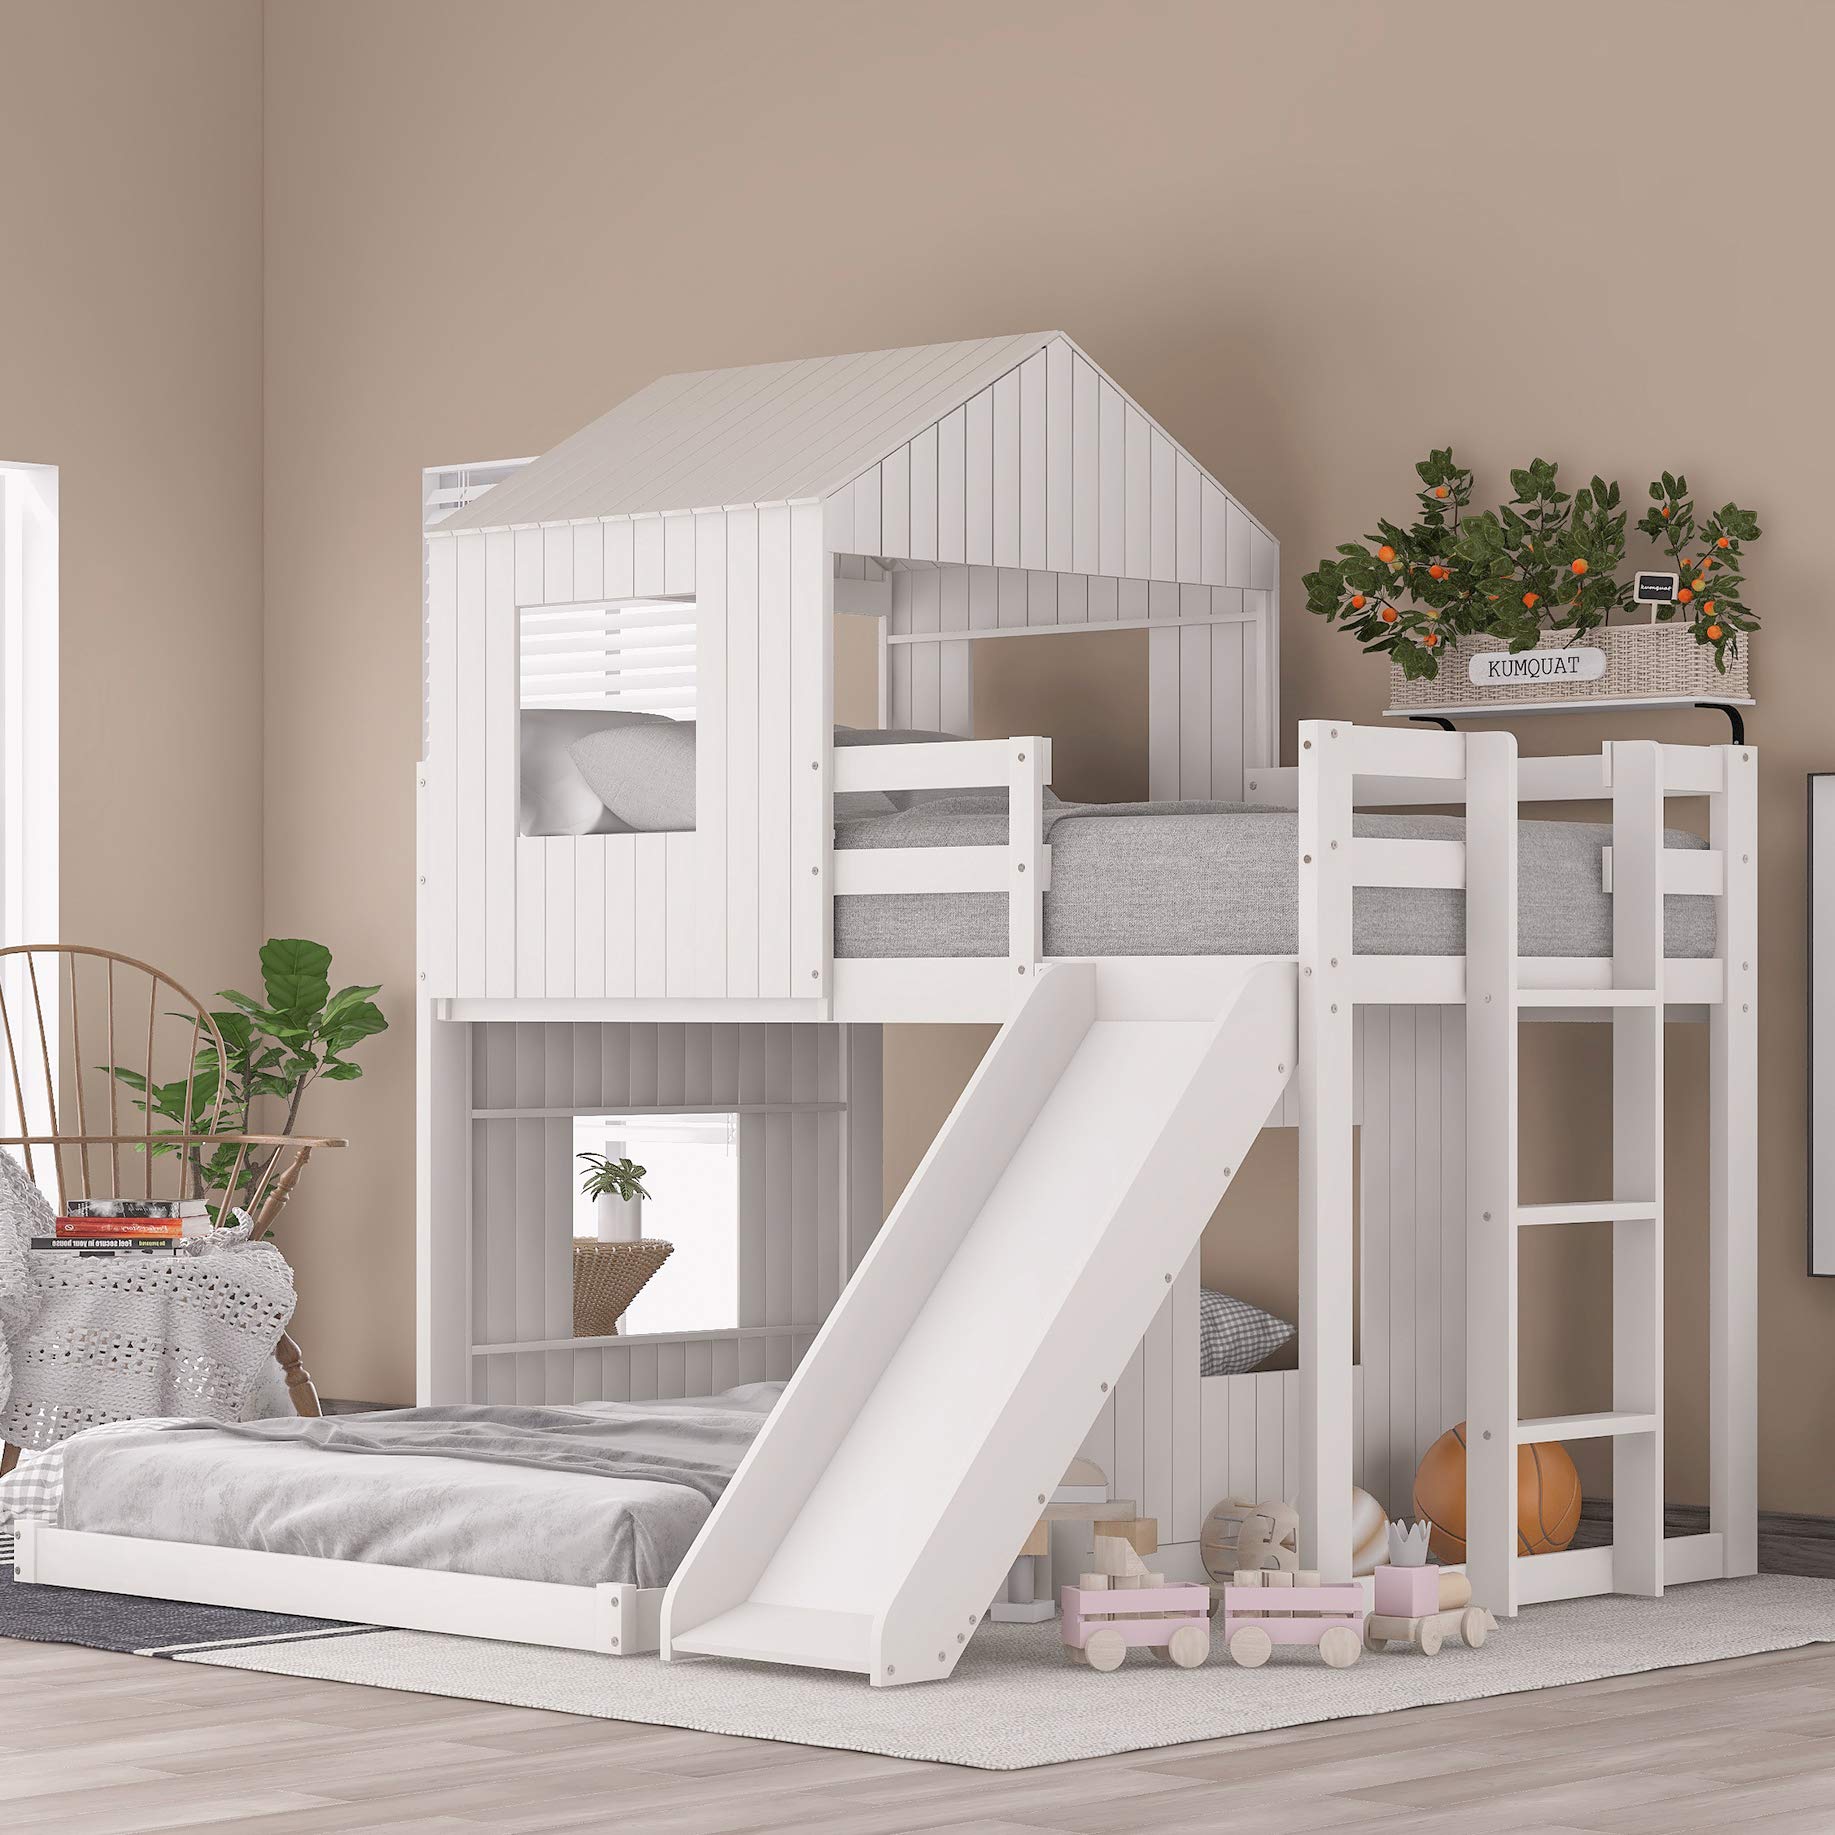 Bunk Bed in Neutral Colors